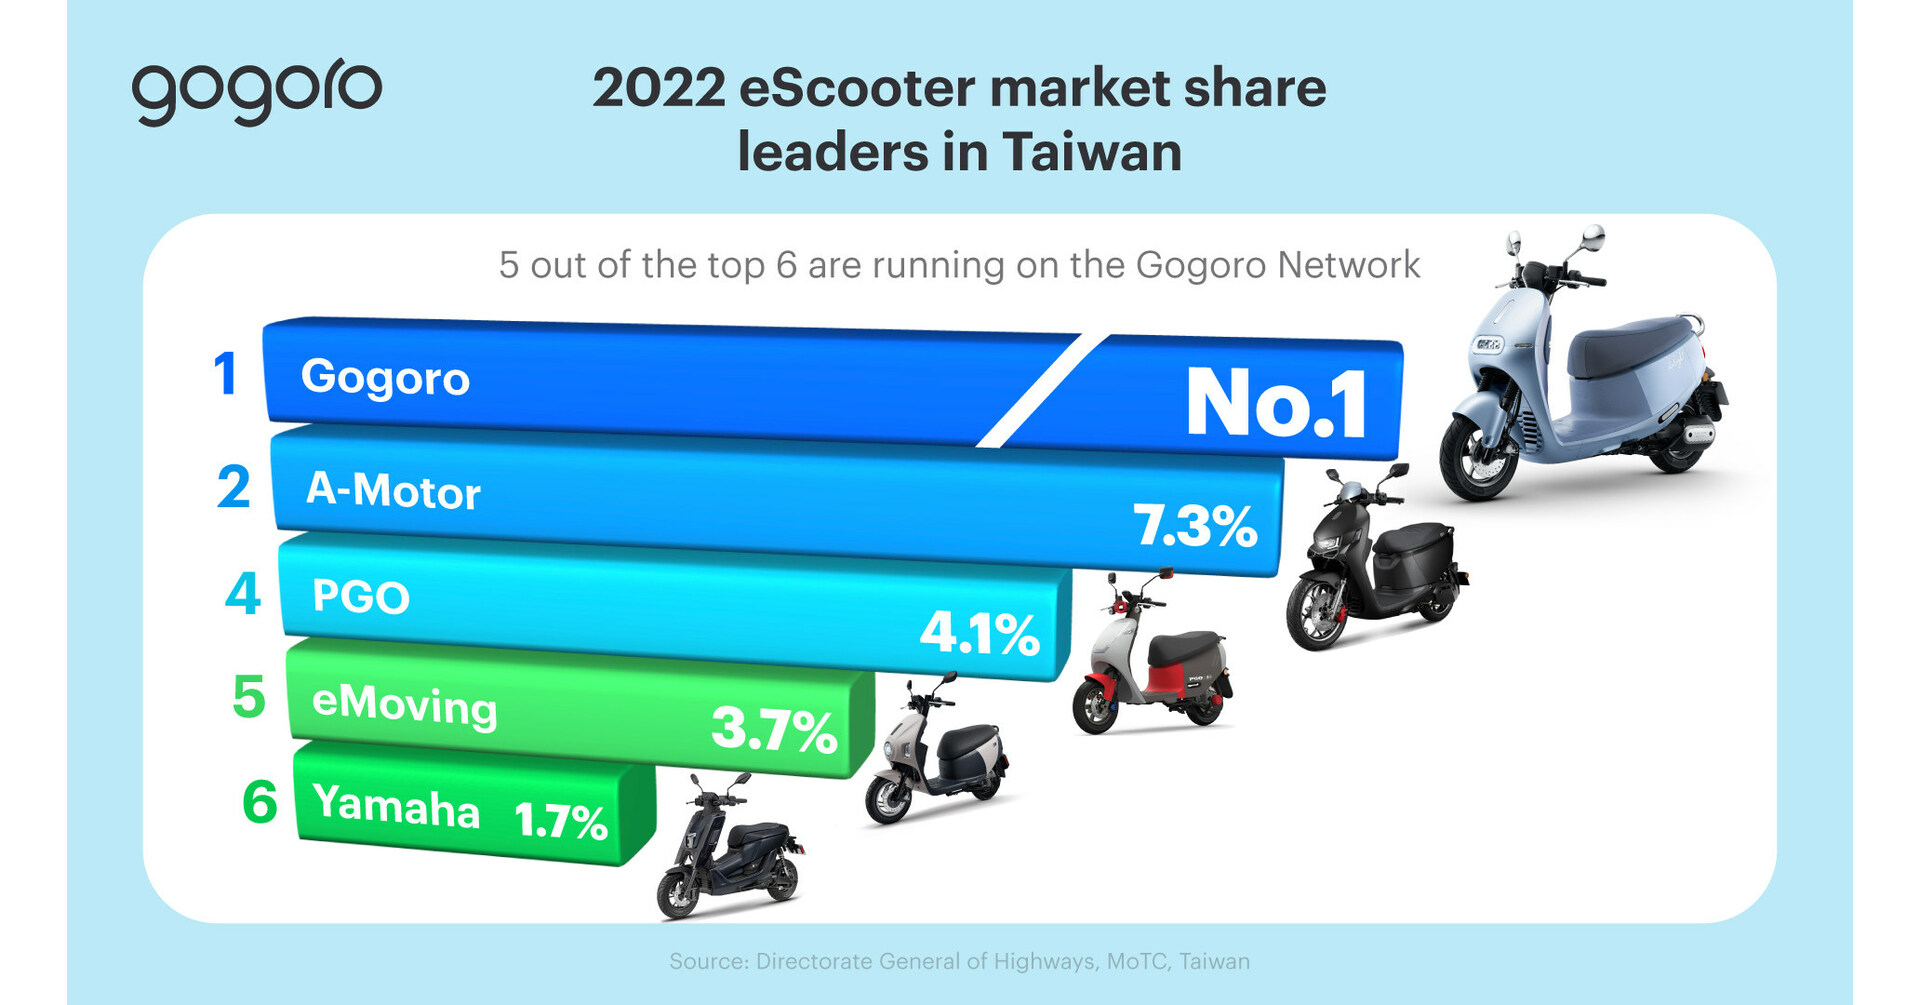 Gogoro Led Taiwan in Electric Scooter Sales in 2022 For the Seventh Straight Year and Network Battery Swapping Powered 90-percent of Taiwan's Electric Scooters